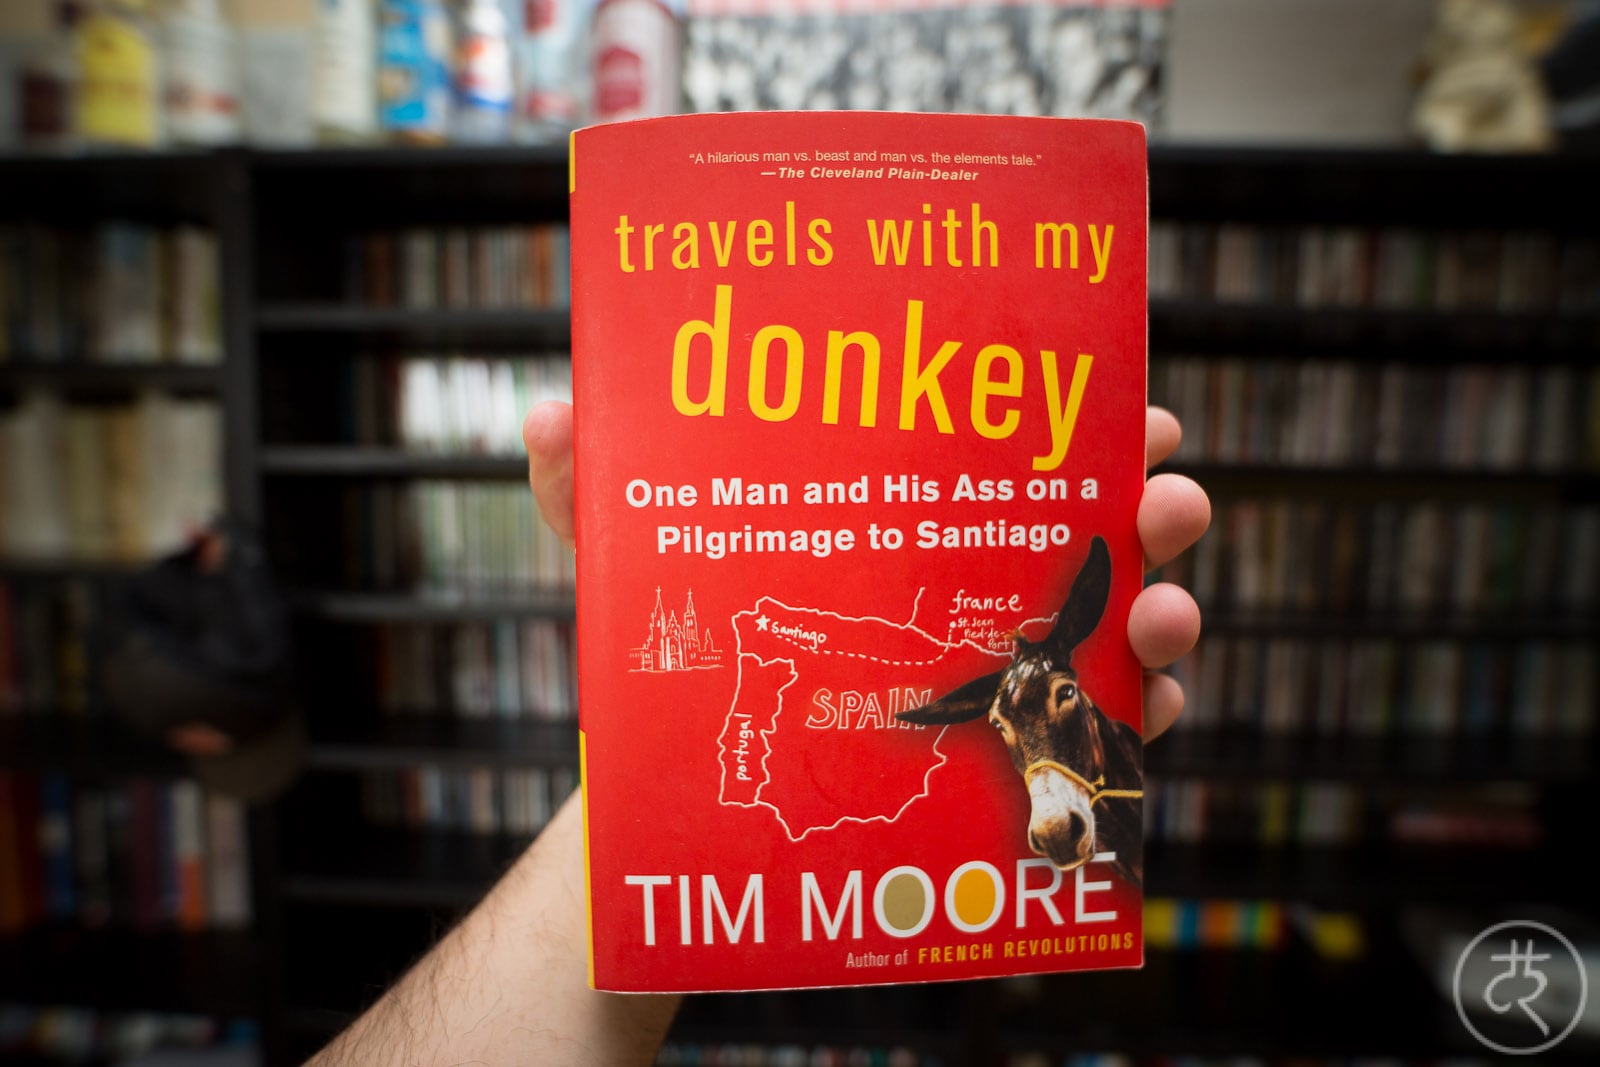 Tim Moore's "Travels With My Donkey"